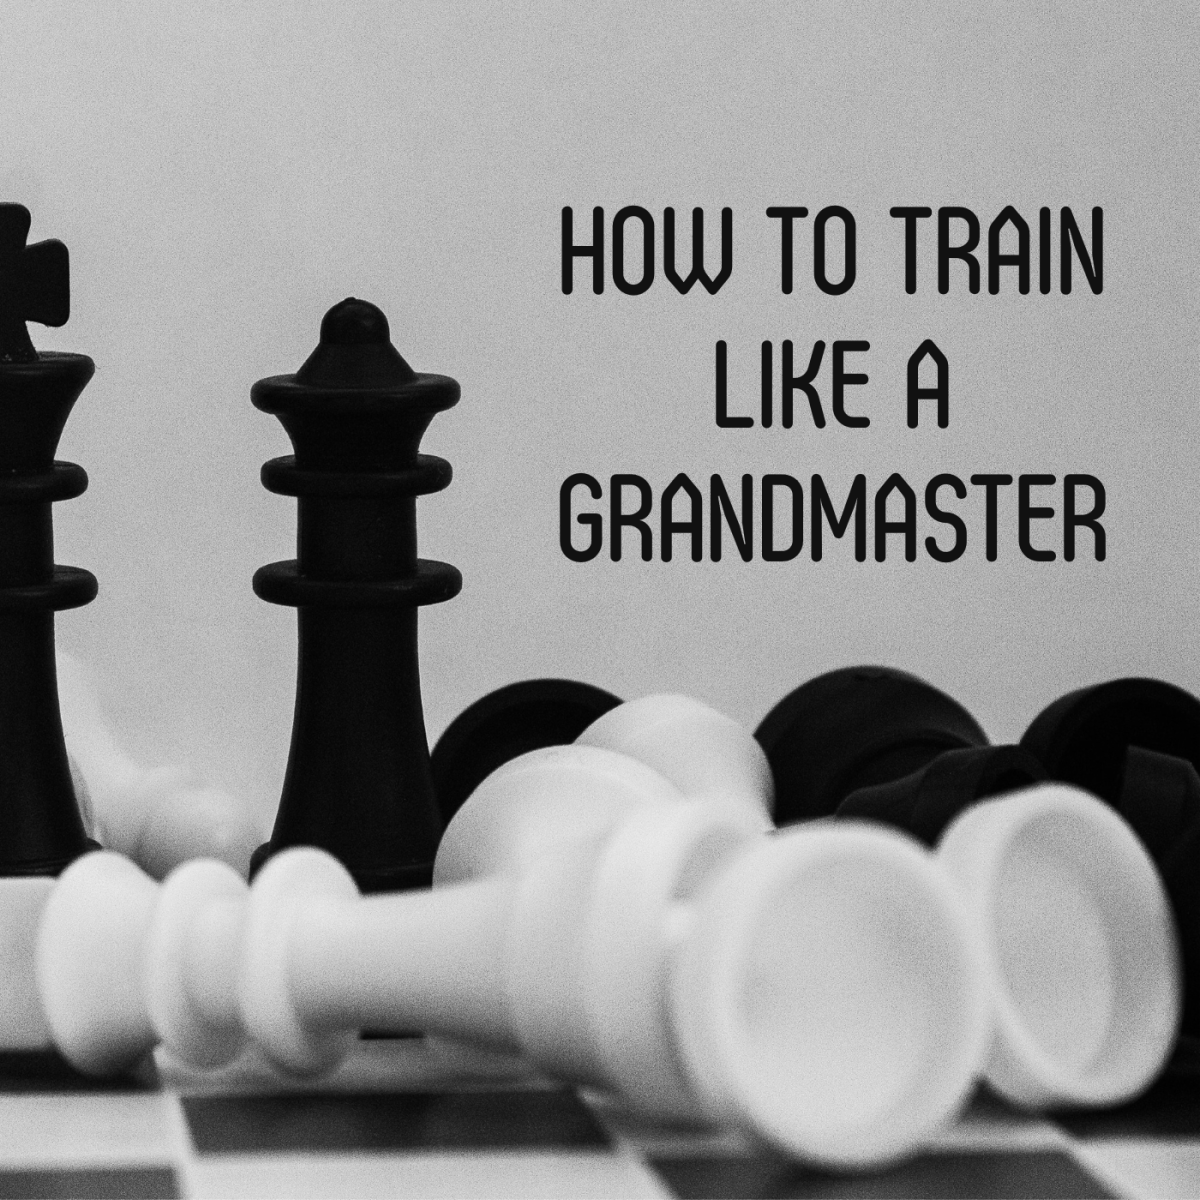 Train like a pro to improve your chess game.